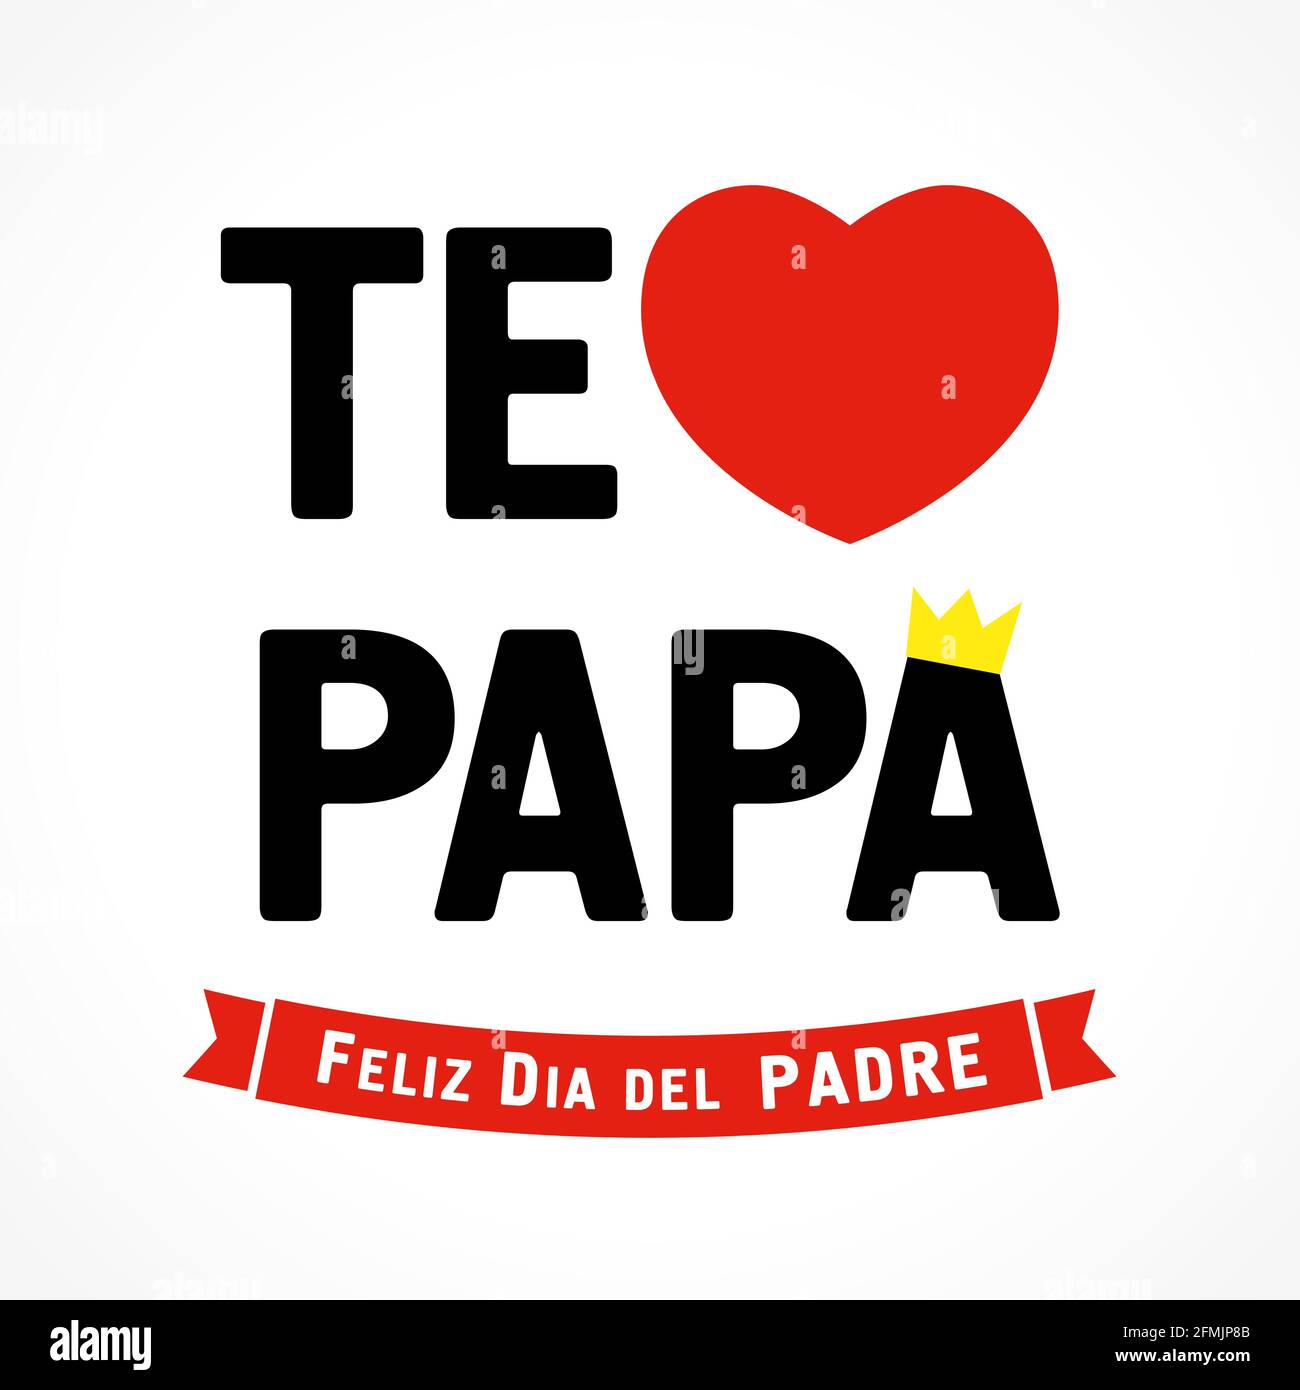 Te amo Papa, Feliz dia del padre Spanish elegant lettering, translate - I love you Dad, Happy fathers day. Greeting card for father day vector illustr Stock Vector